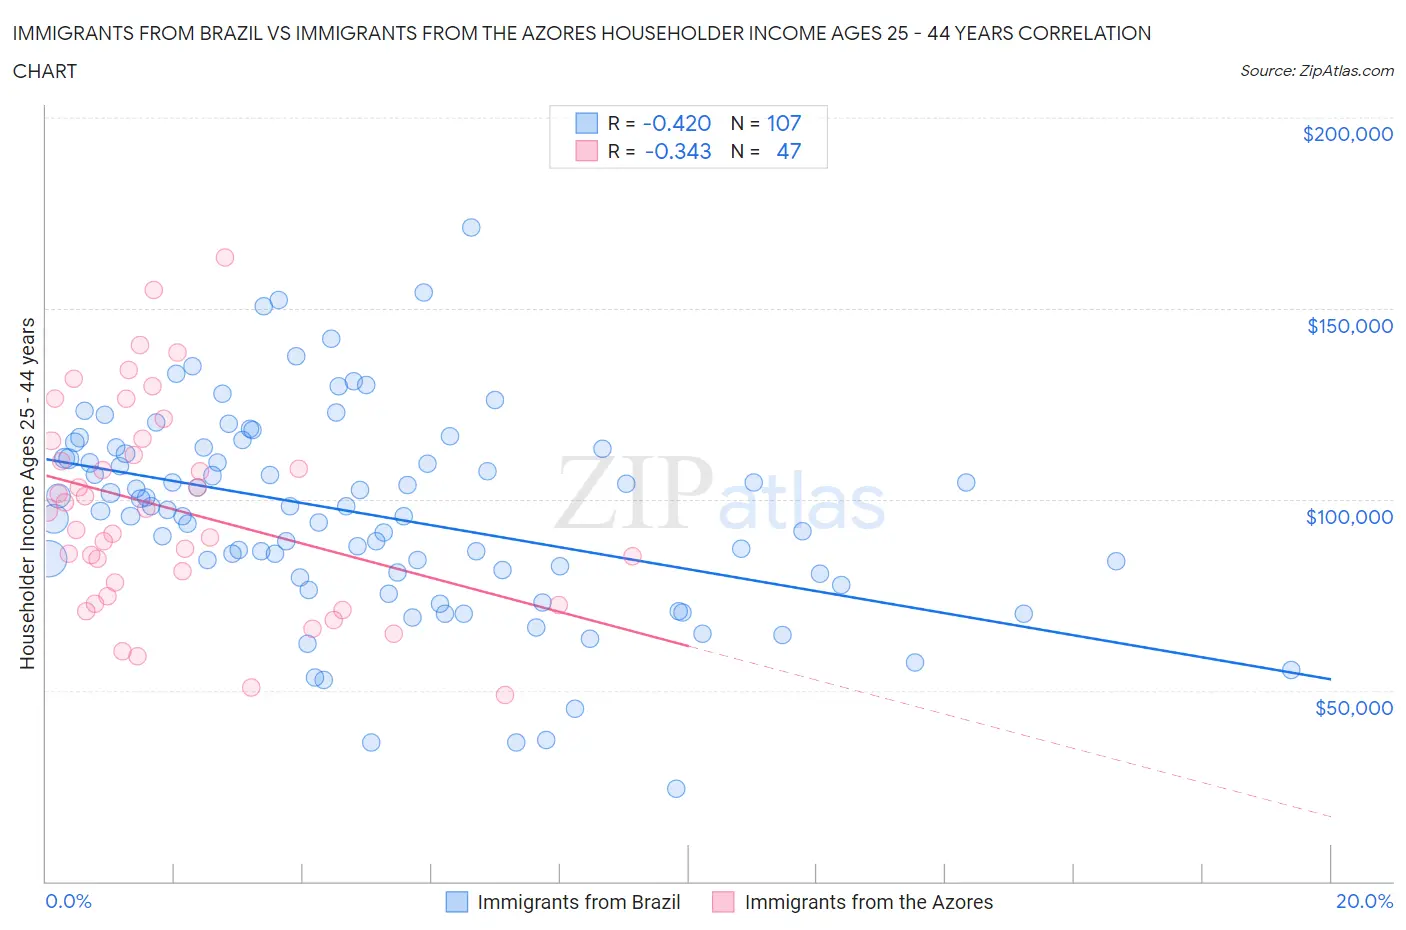 Immigrants from Brazil vs Immigrants from the Azores Householder Income Ages 25 - 44 years